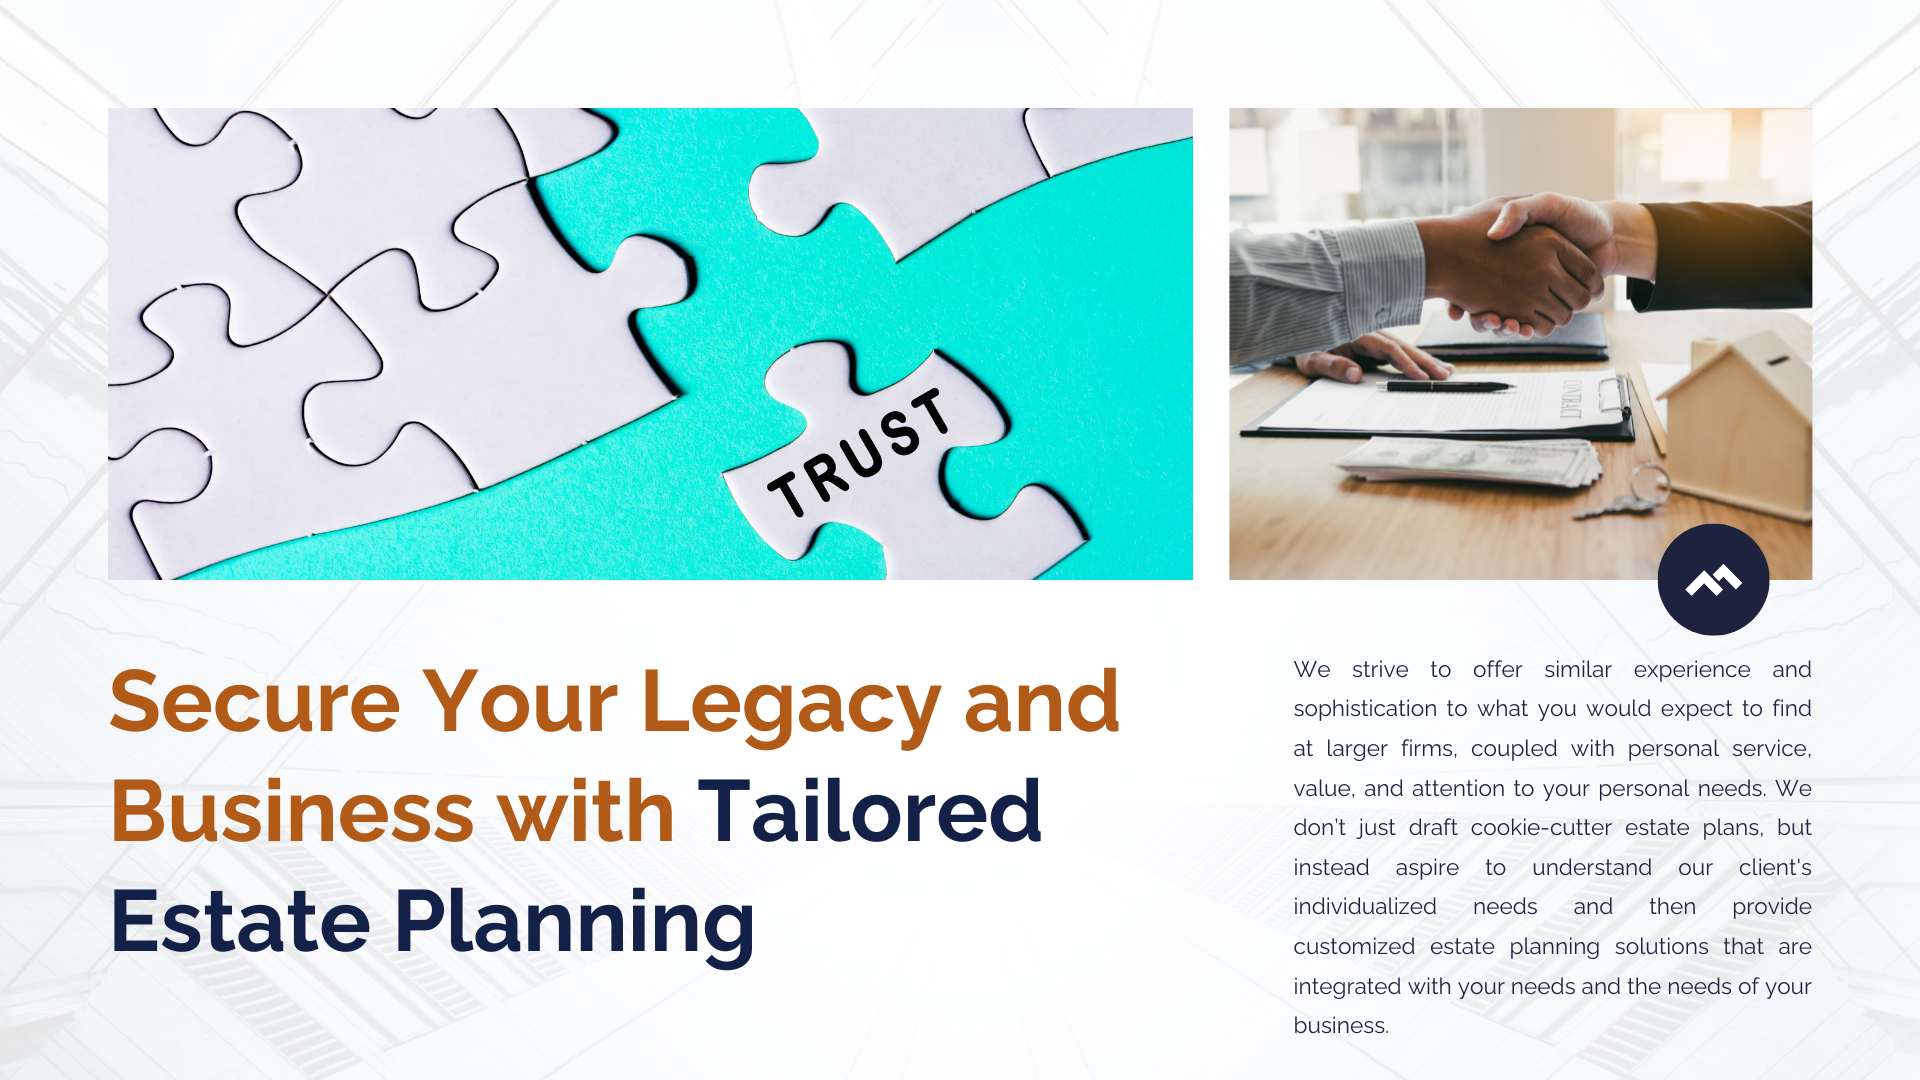 Secure Your Legacy and Business with Tailored Estate Planning